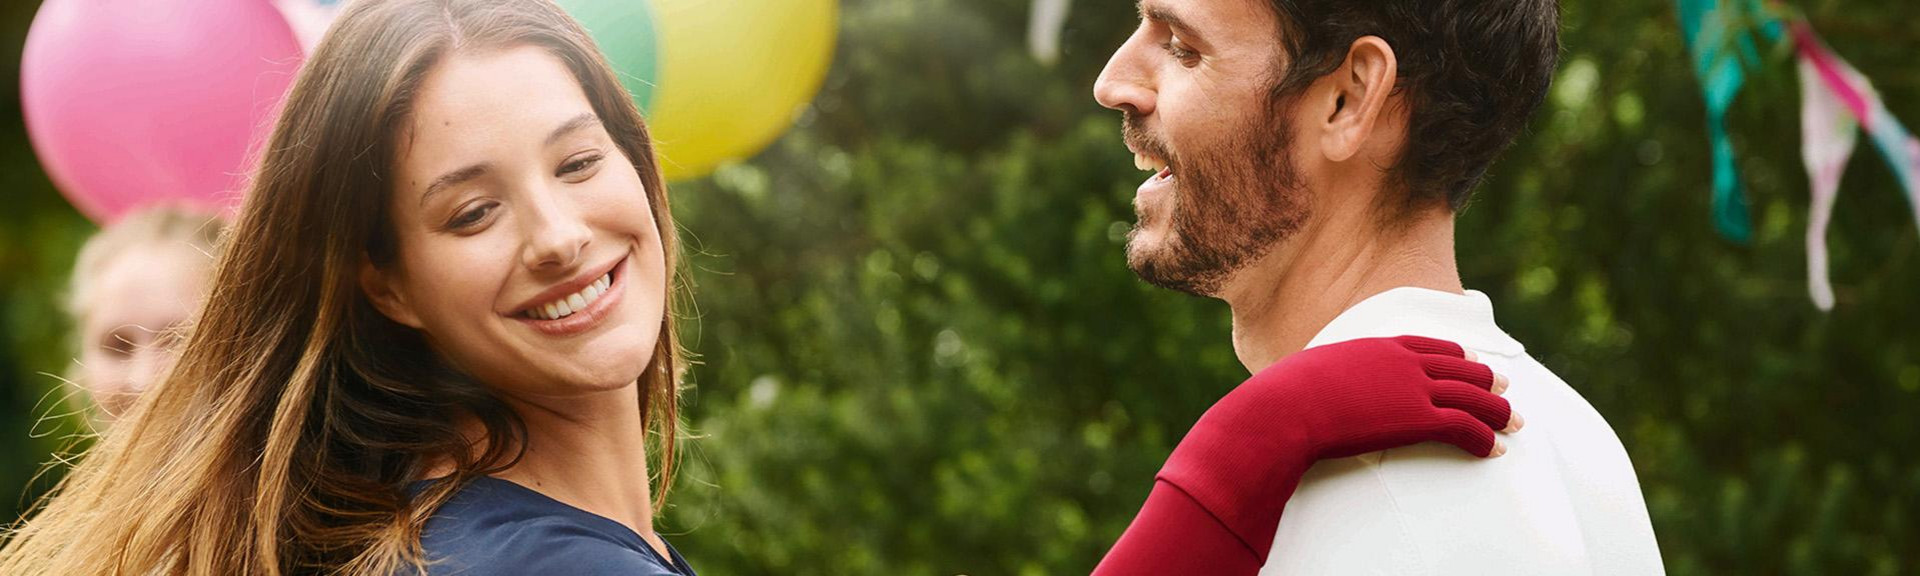 Close up of couple dancing in the garden with balloons in the background, both smiling, woman wearing compression on hand which is on partner's shoulder